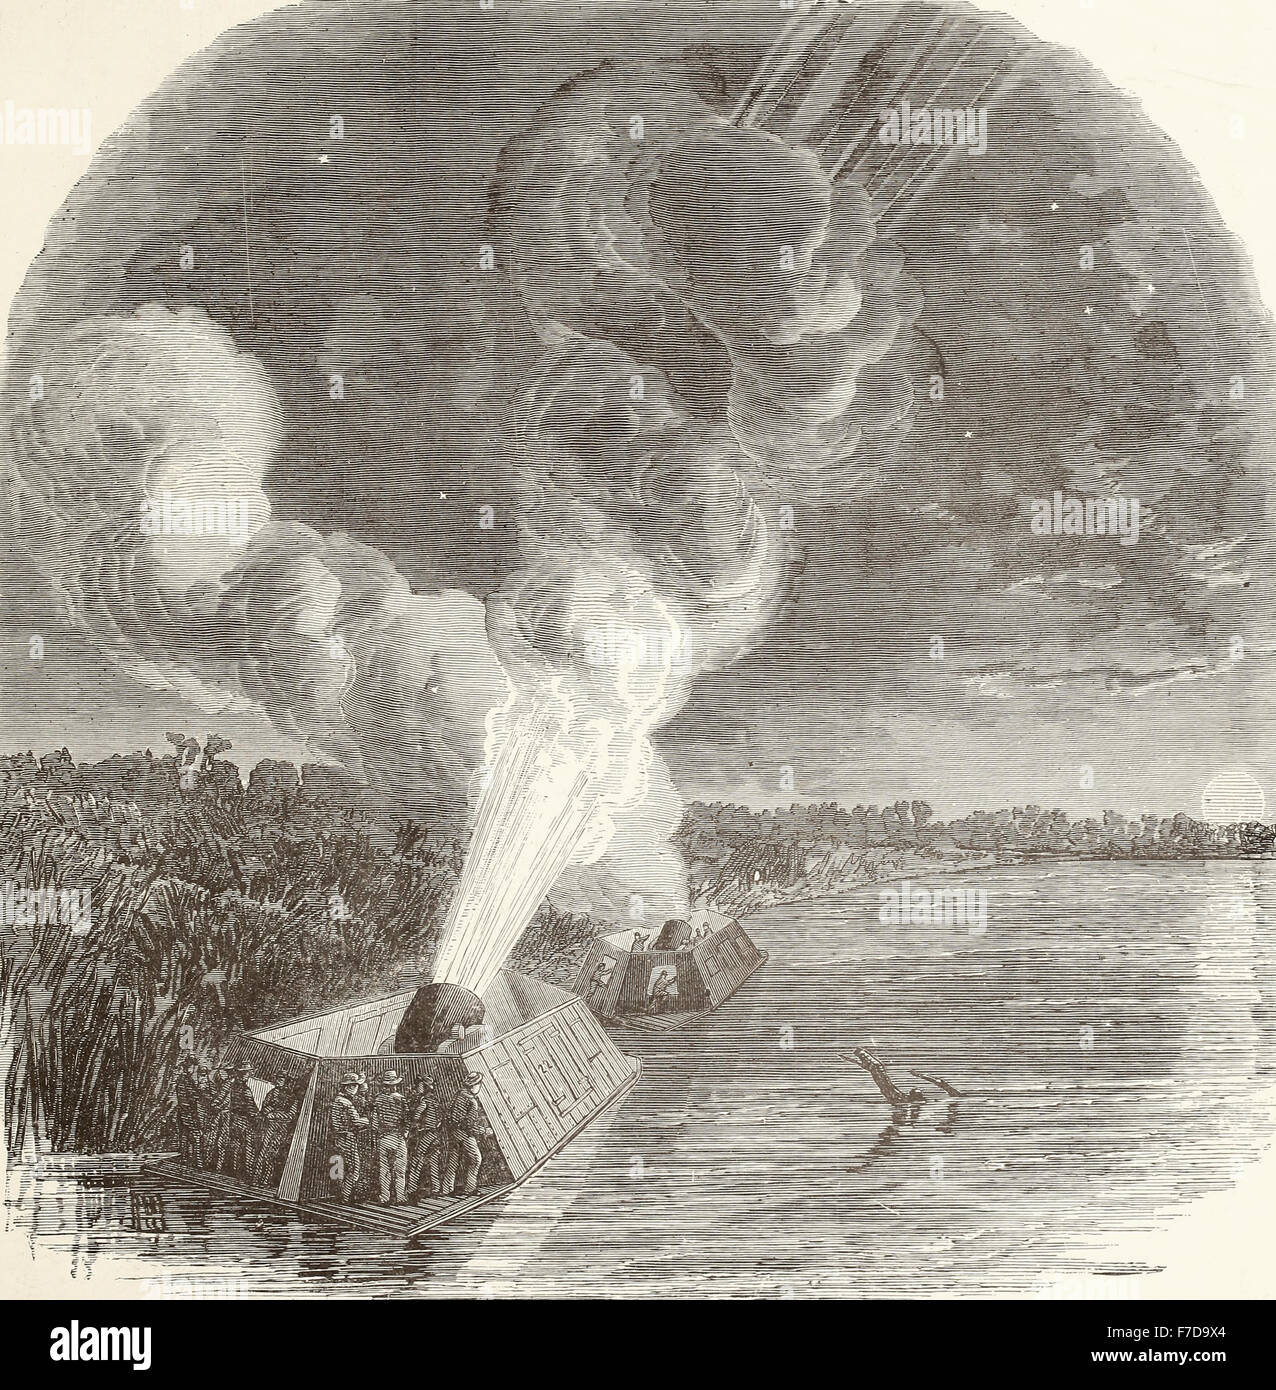 Siege of Island No. 10 on the Mississippi River - Night Bombardment by the Federal Mortar boats - 10 PM - March 18th 1862 - USA Civil War Stock Photo